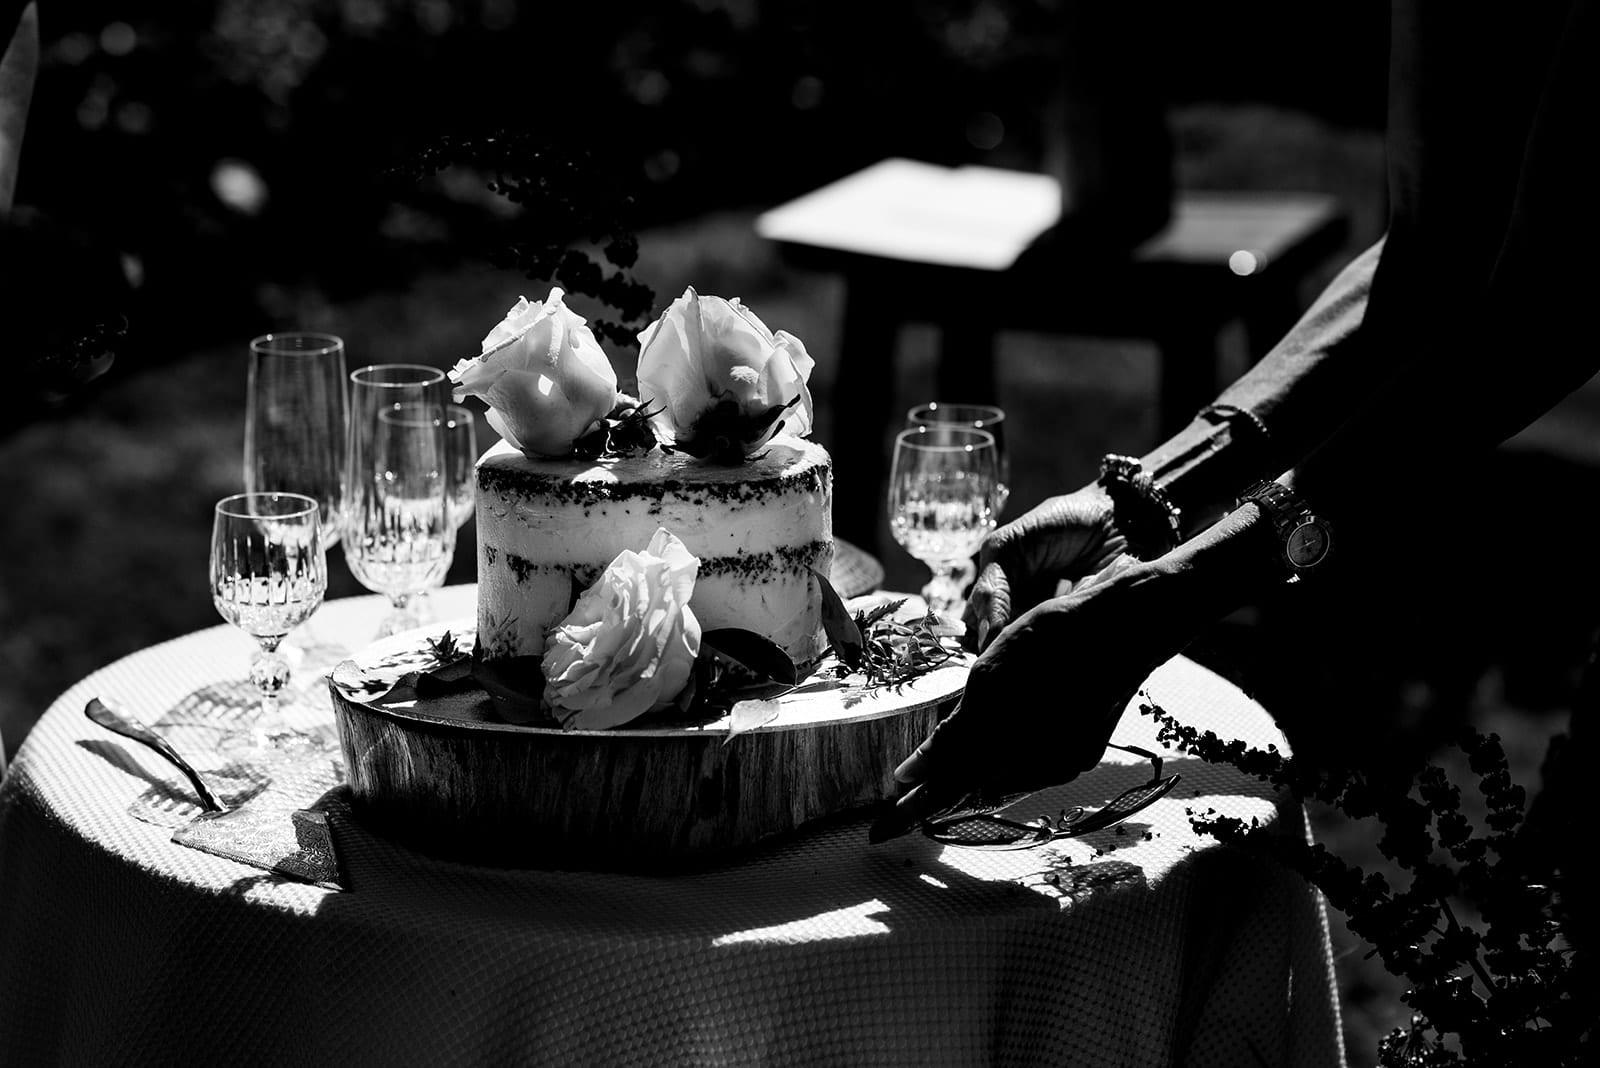 The wedding cake is placed on the table after a wedding